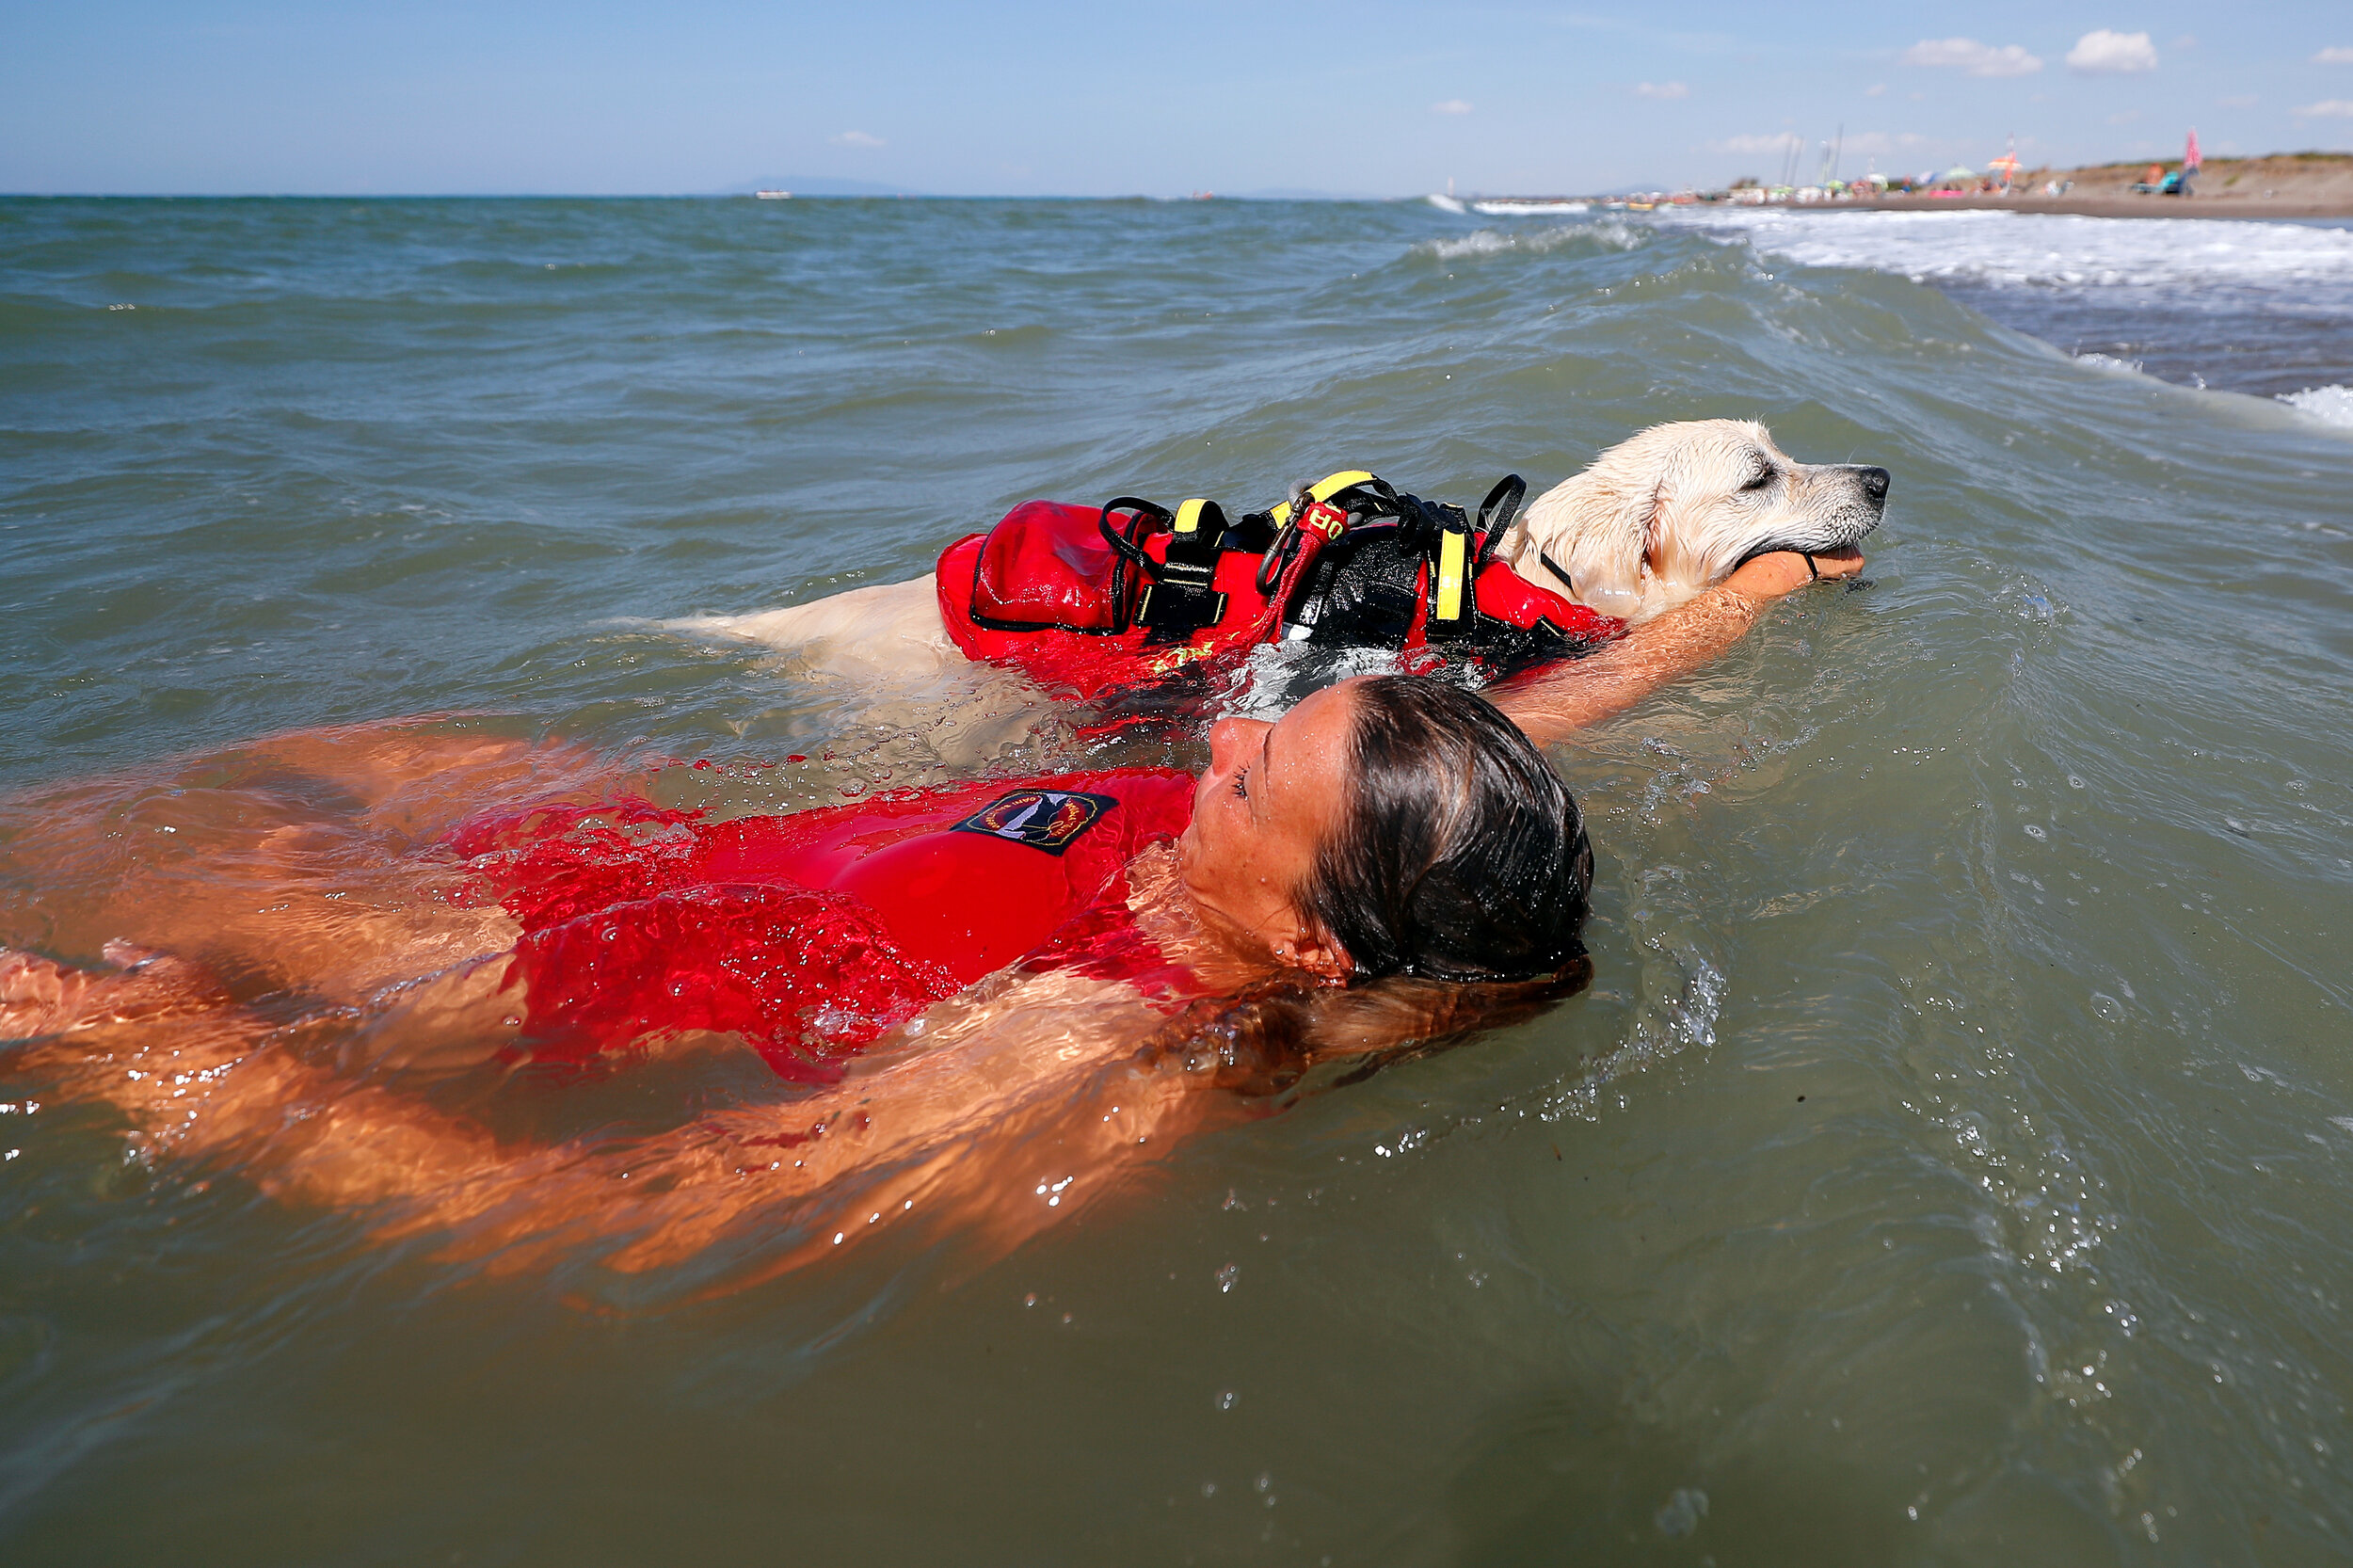  A member of an all-female group of canine rescuers from the Italian School of Rescue Dogs (La Scuola Italiana Cani Salvataggio) attends a training session with her dog before patrolling the beach to ensure swimmers can enjoy their time at the sea in